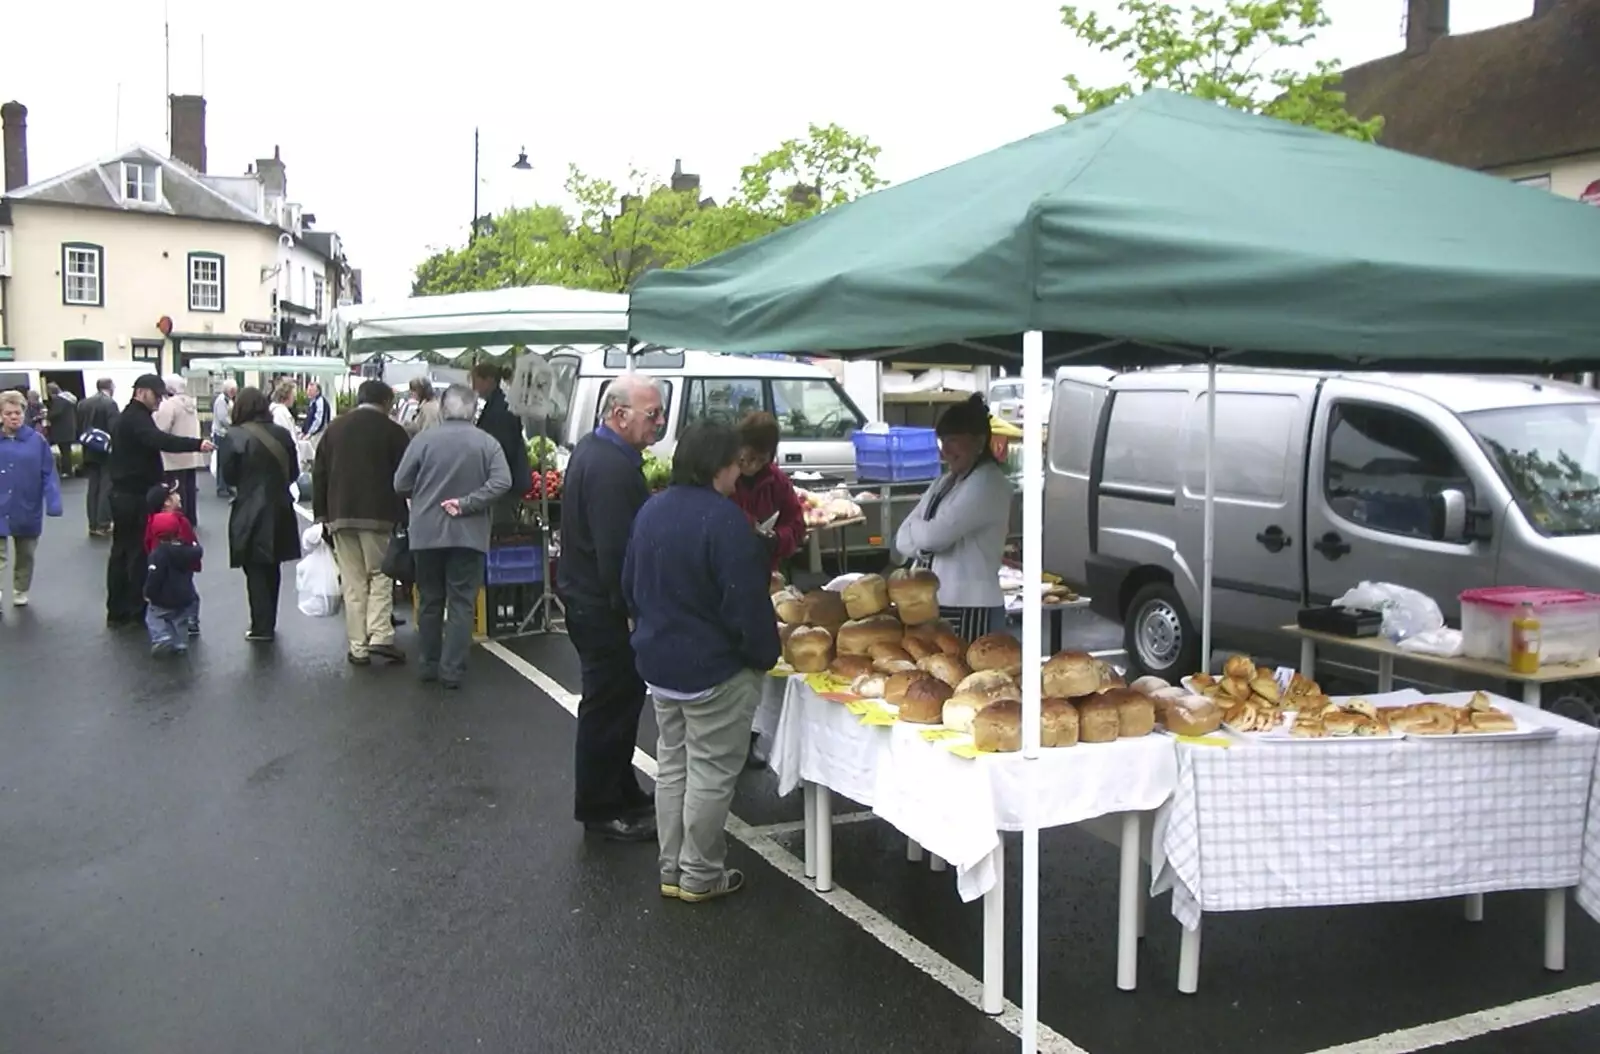 There's a food market in Lenham, from A Trip Around Leeds Castle, Maidstone, Kent - 9th May 2004